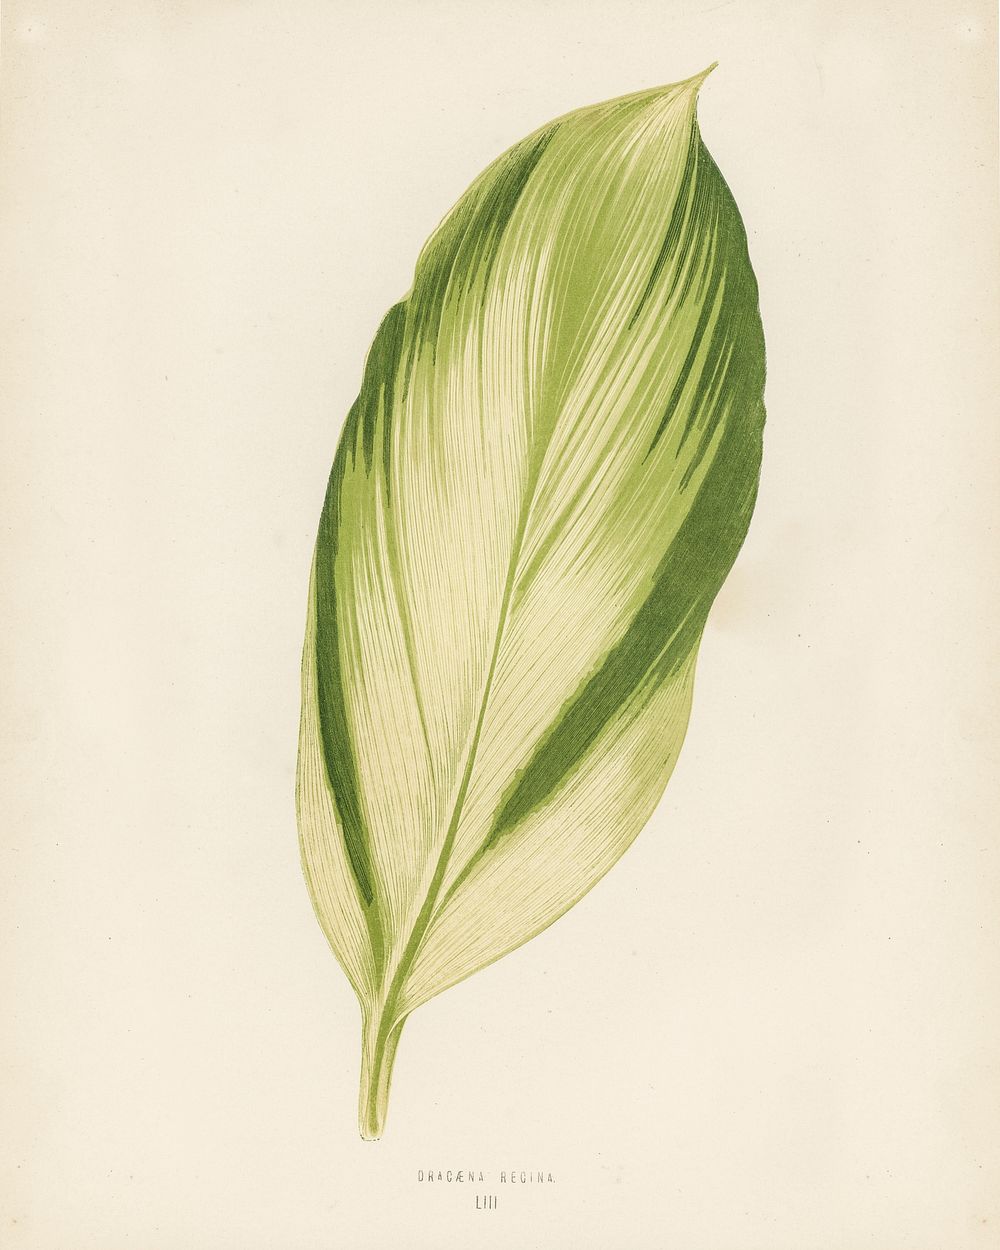 Dracaena recina. Digitally enhanced from our own 1929 edition of New and Rare Beautiful-Leaved Plants by Benjamin Fawcett…